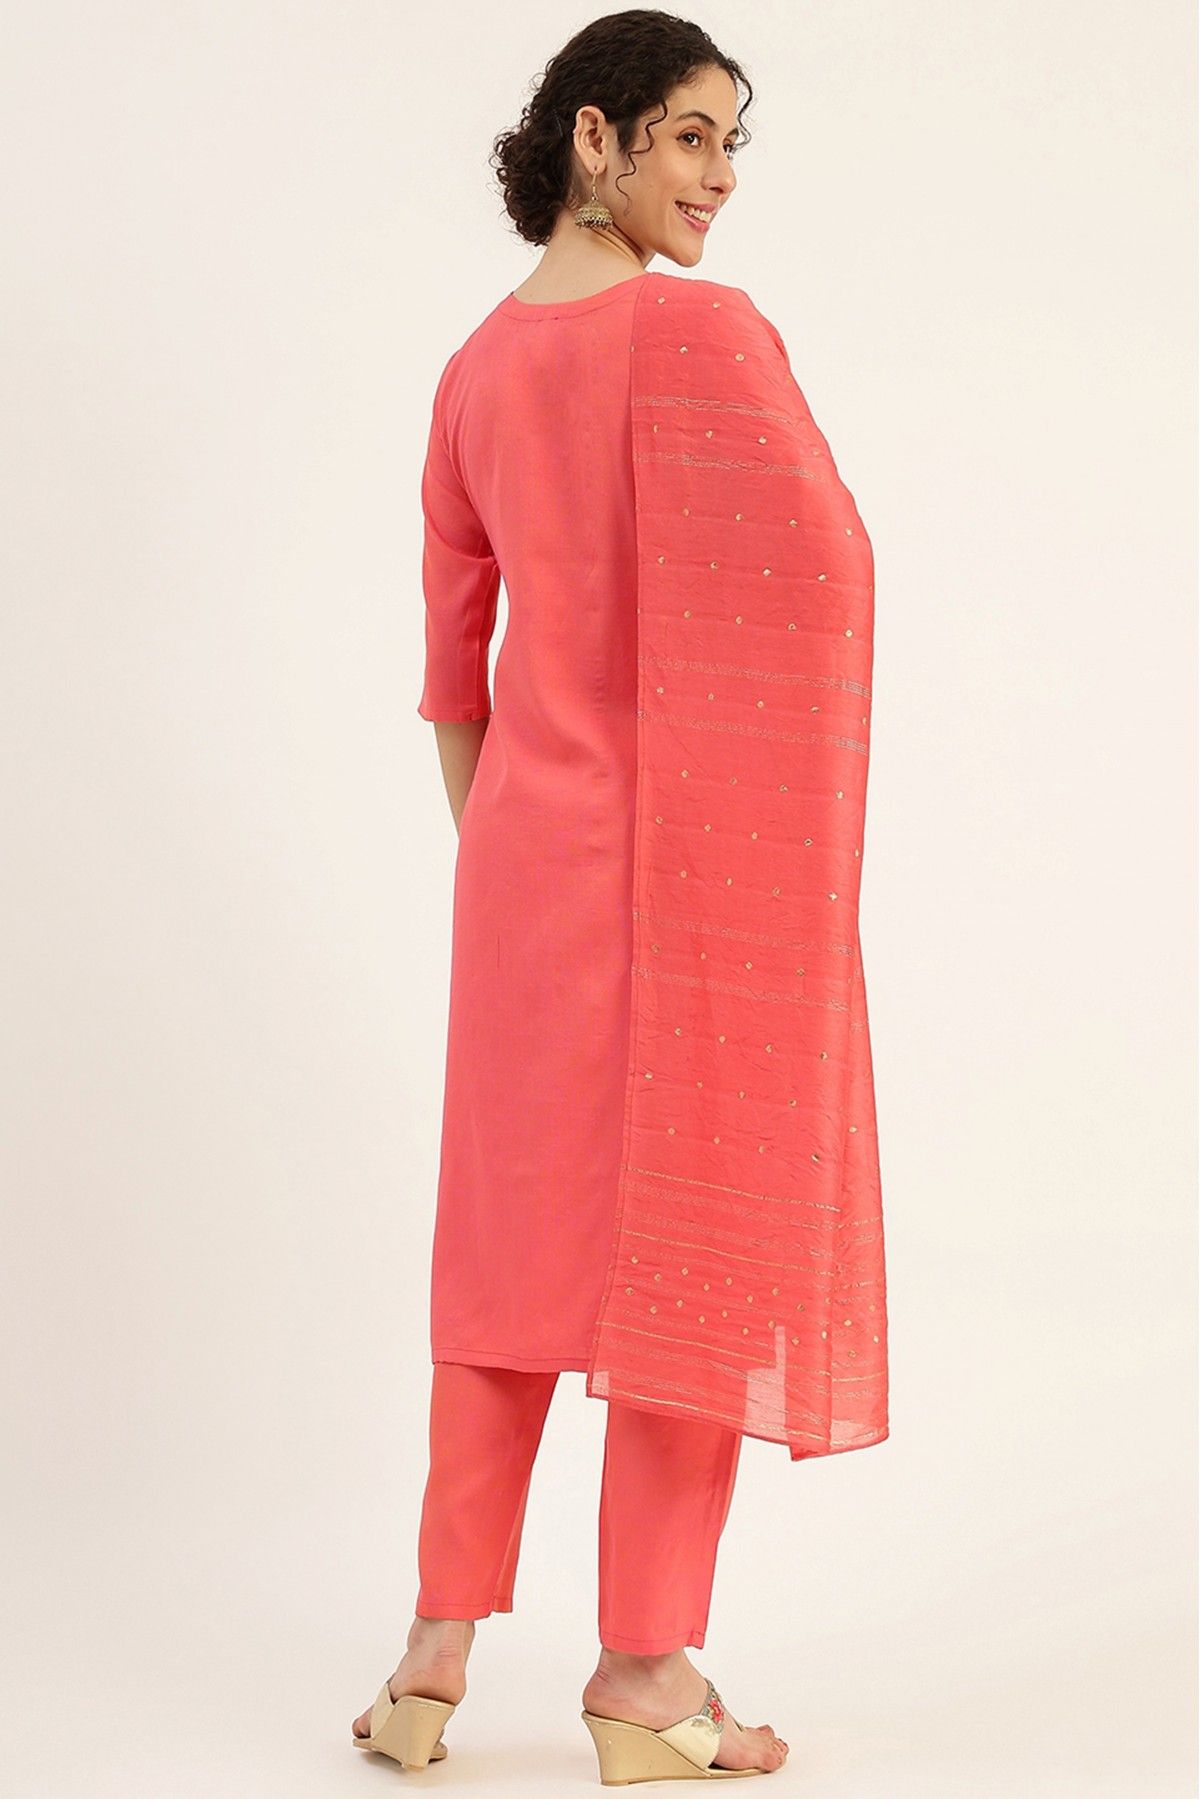 Viscose Rayon Embroidery Pant Style Suit In Pink Colour SS4781716